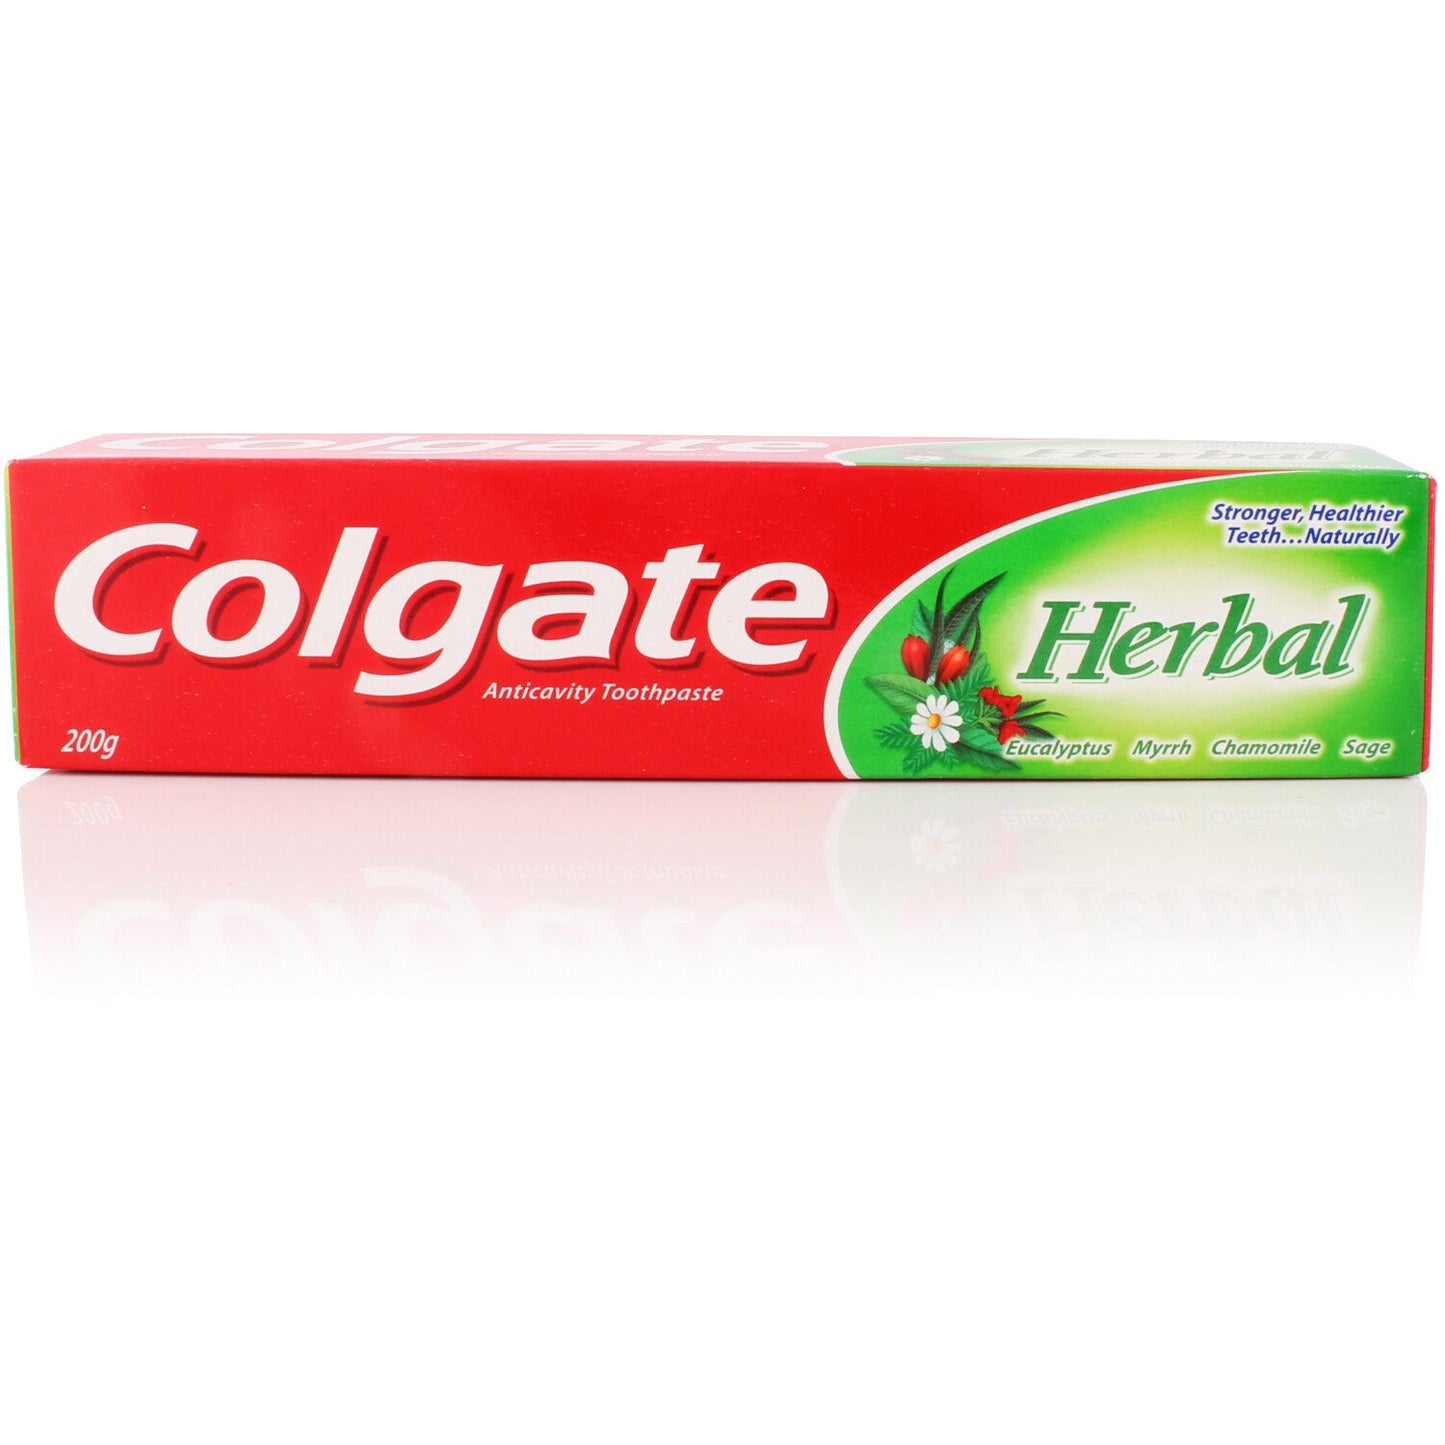 Colgate Toothpaste - Herbal, 200G Tube, Cavity Protection